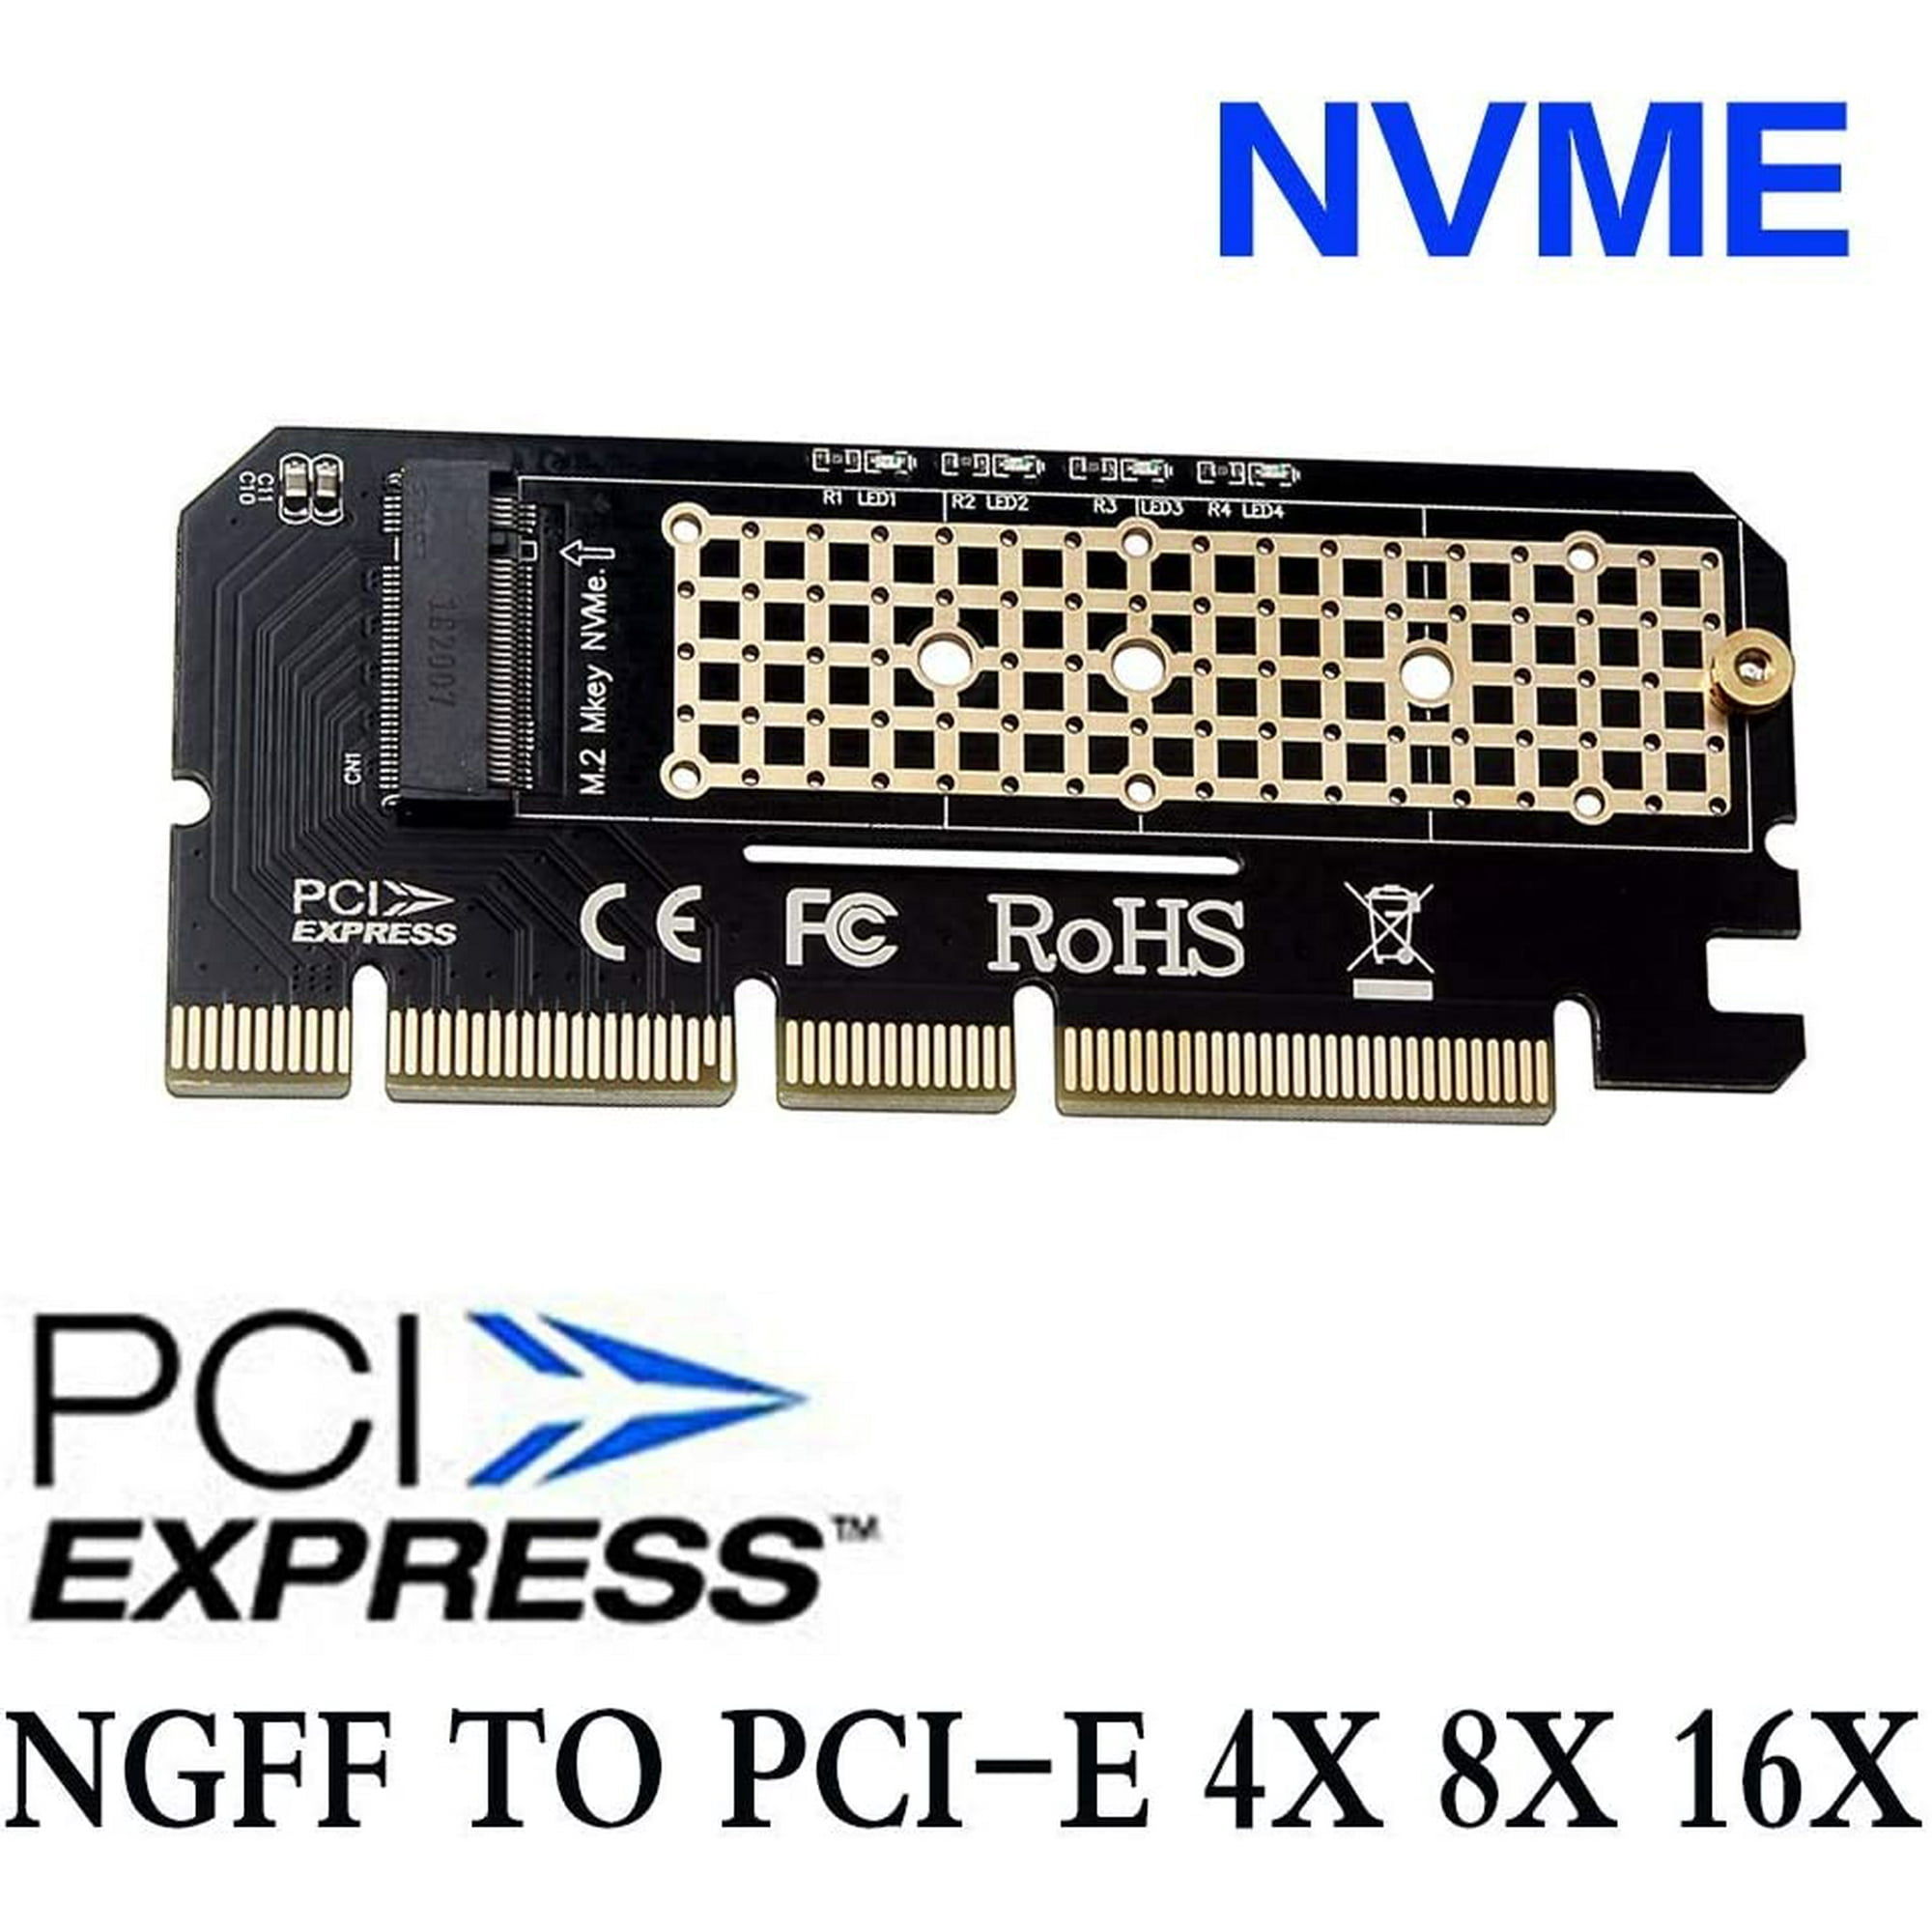 M.2 NVMe SSD NGFF to PCIE 3.0 X16 Adapter M Key Card Suppor PCI Express 3.0 x4 2230-2280 Size m.2 Full Speed | Walmart Canada